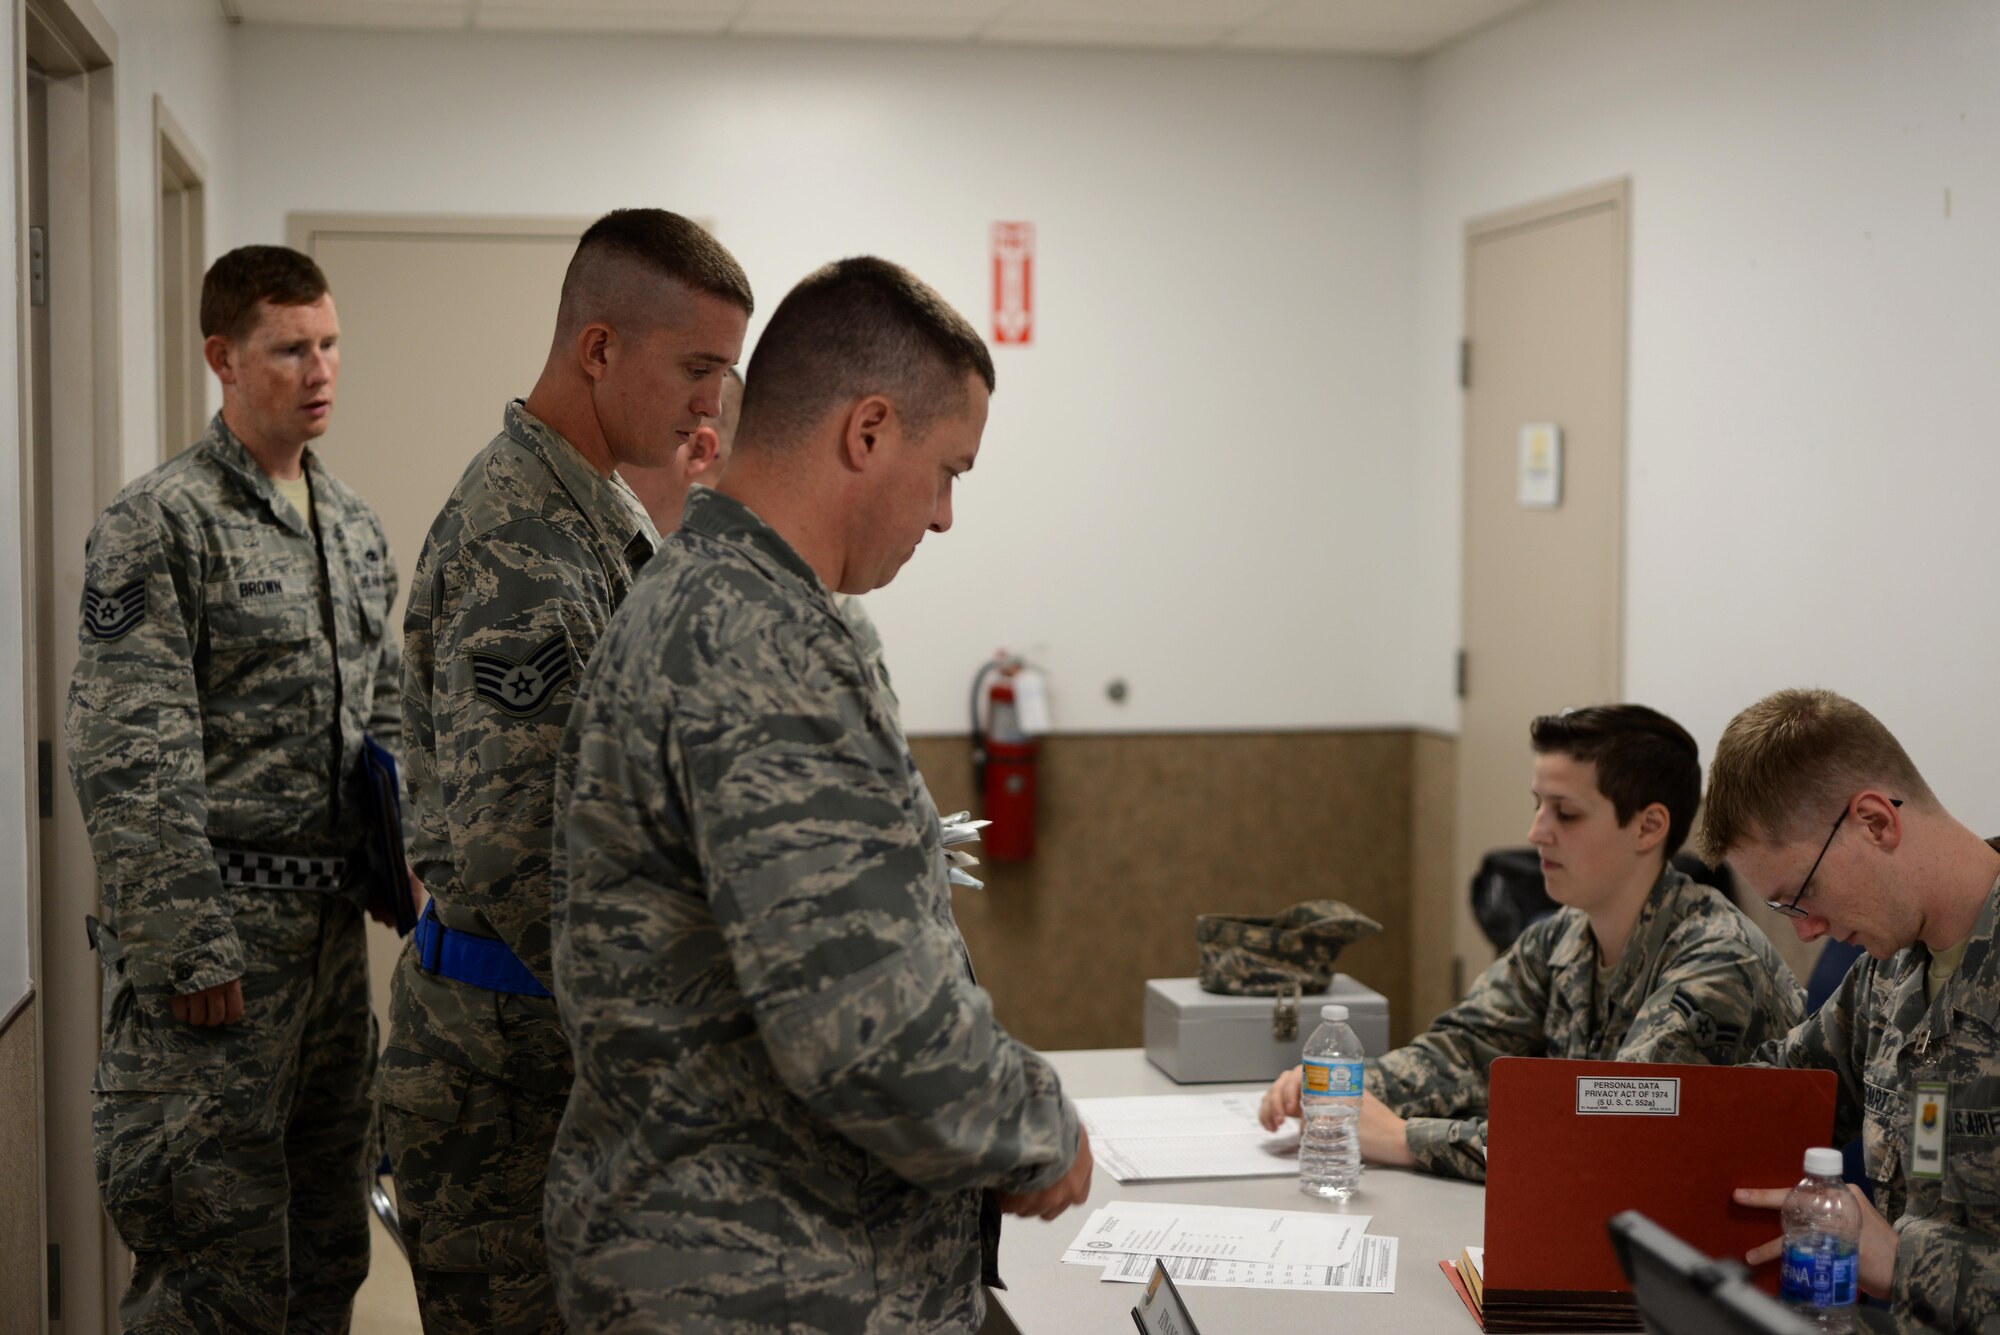 Members of Team MacDill walk through a pre-deployment line during a mobility exercise at MacDill Air Force Base, Fla., Aug. 16, 2016. Pre-deployment lines ensured that all Airmen getting ready to deploy had the required documents prior to departure. (U.S. Air Force Photo by Airman 1st Class Rito Smith)